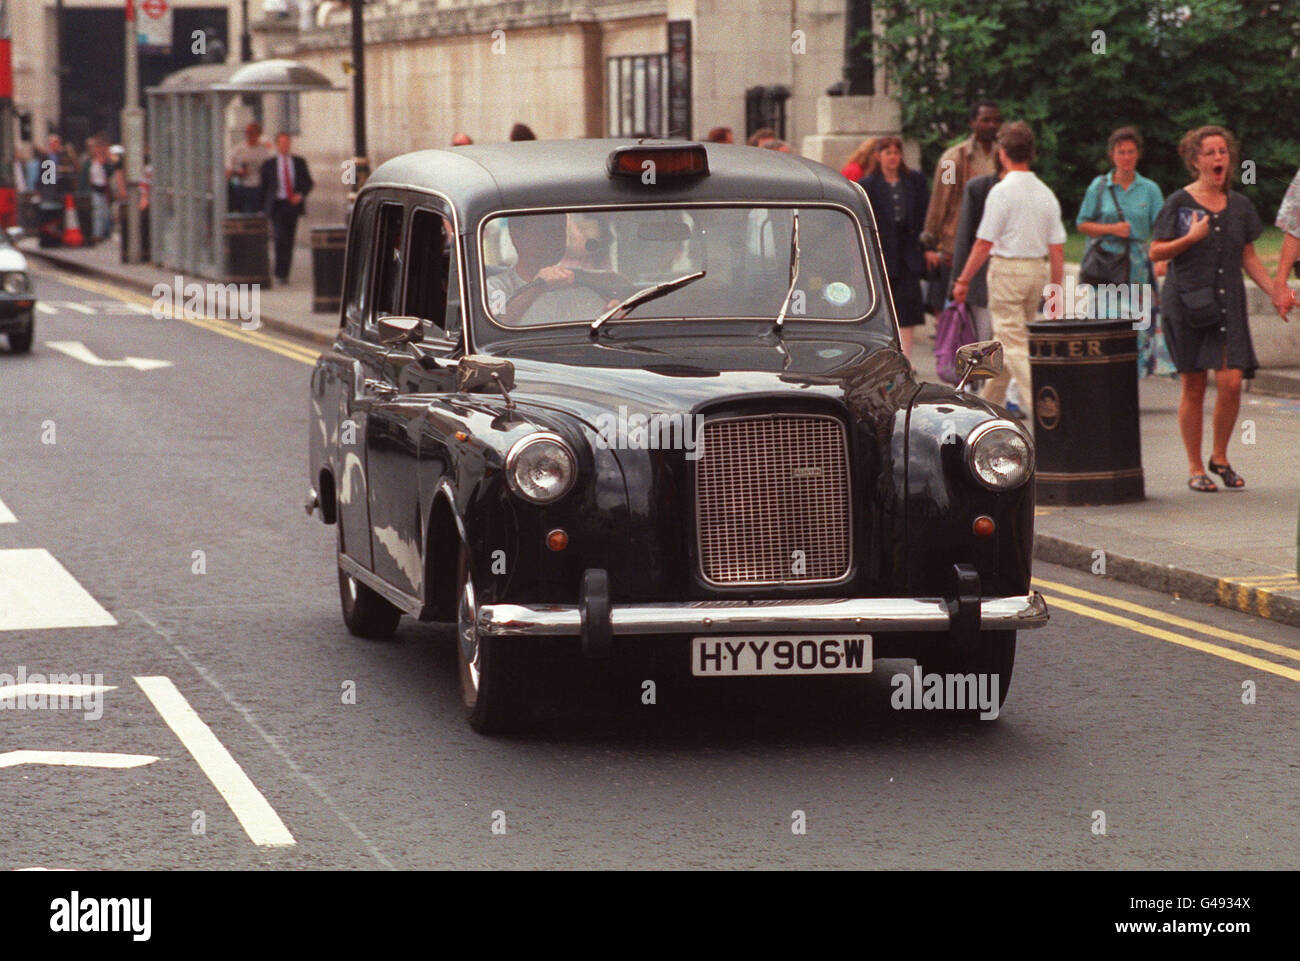 PA NEWS PHOTO 14/8/92 253677-22 A black cab, one of the distinctive forms of travel in the capital, London 20/07/2004  More than 100 cabbies will descend on Clarence House Tuesday July 20, 2004, for a special get-together with the Prince of Wales.  Charles is hosting a reception to thank taxi drivers for the contribution they make to the capital with some of the cabbies expected to sweep down the Mall and park their famous Hackney Carriages at the back of Charles's London residence Stock Photo